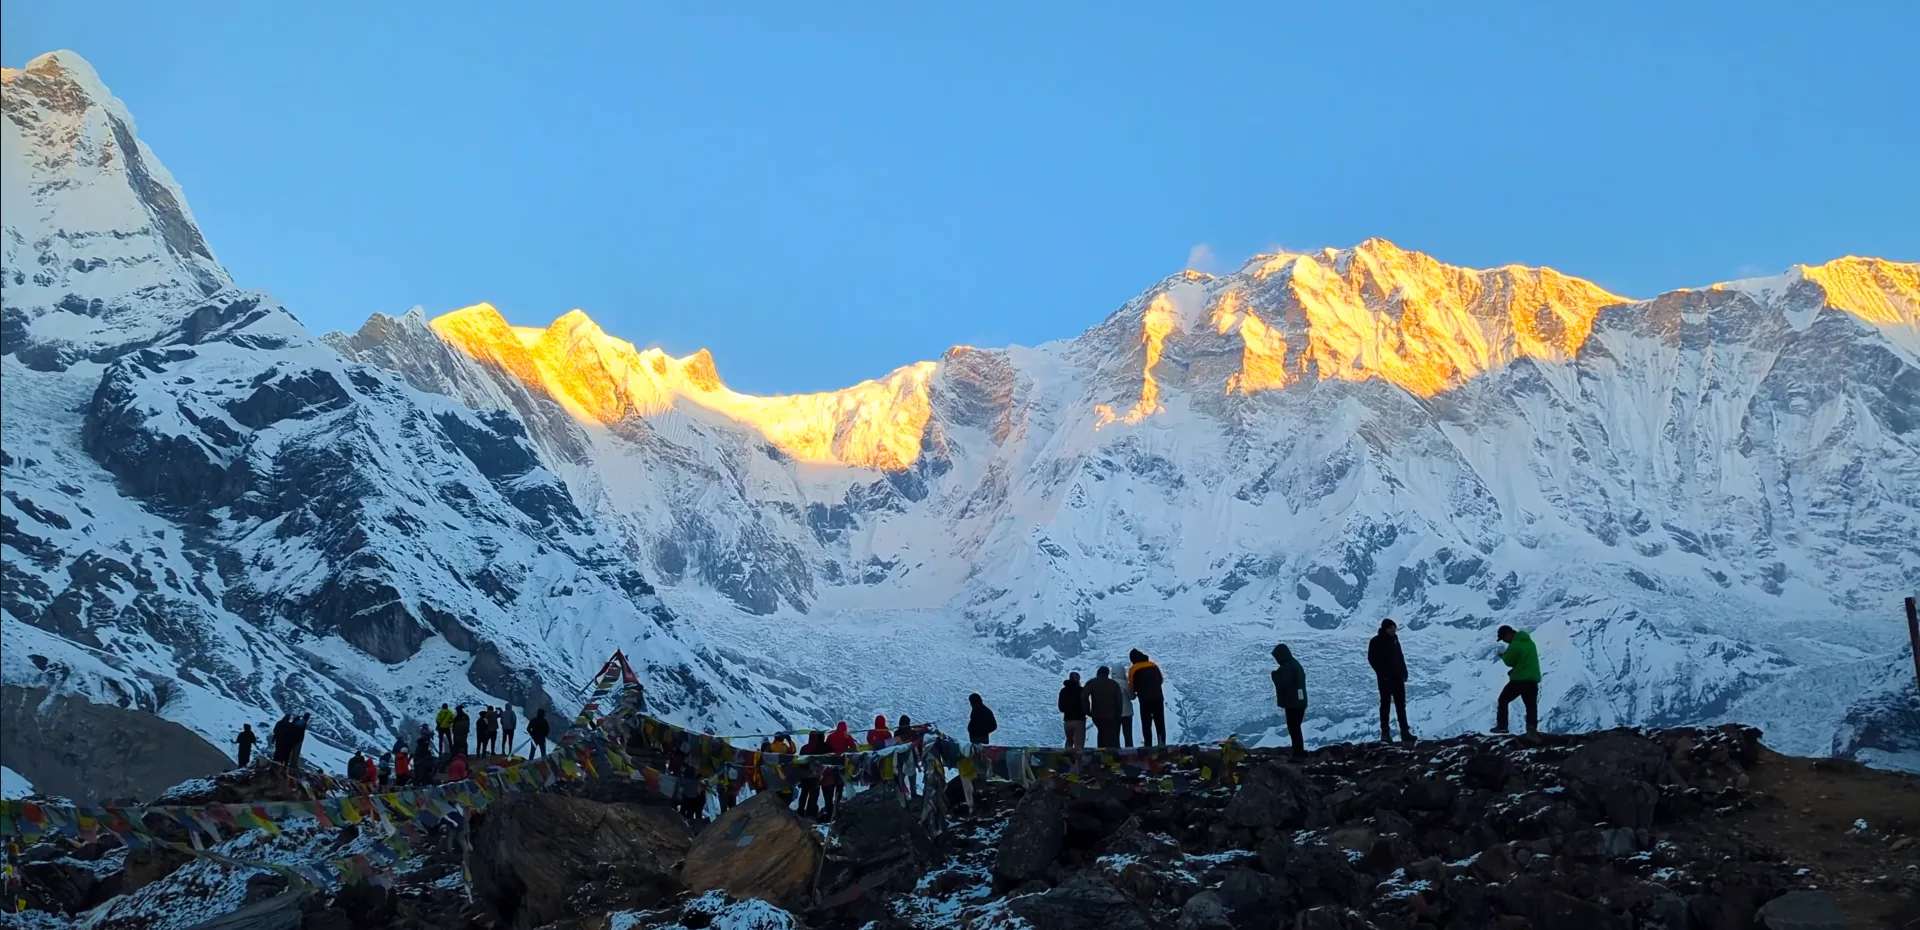 Background Image of Annapurna Base Camp Trek Difficulty